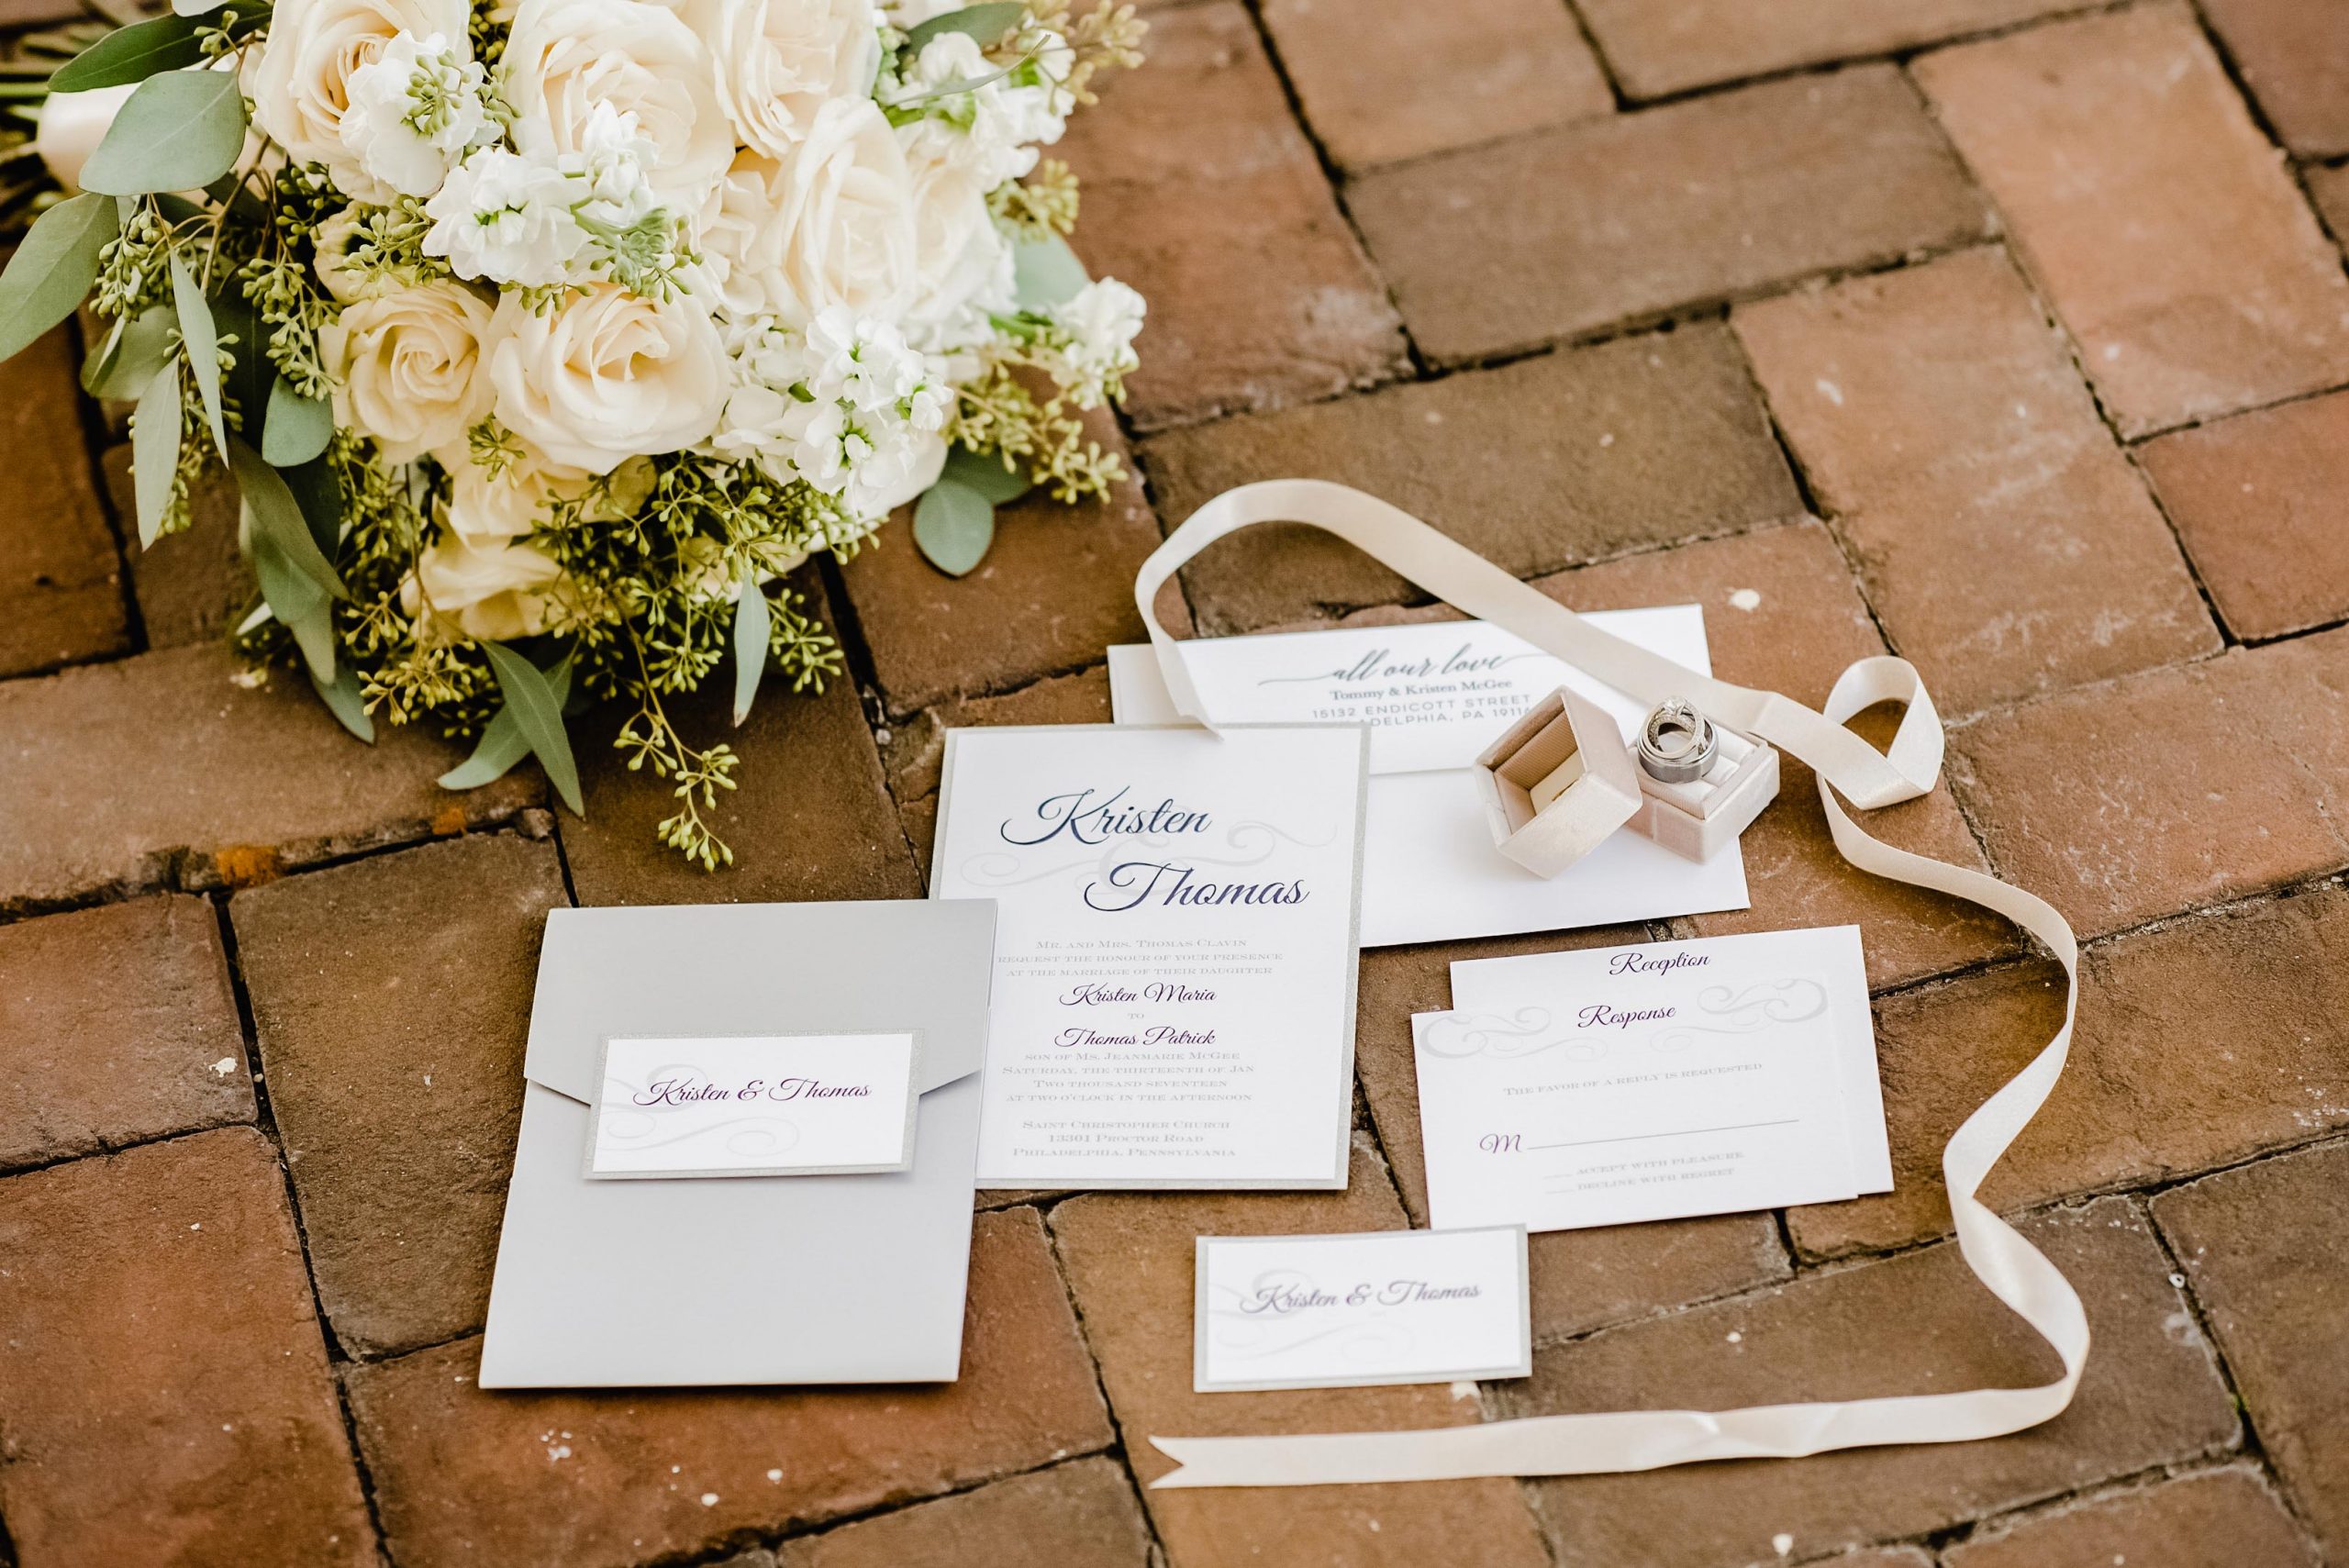 Looking for impactful invite designs for your winter wedding? Check out these ideas for some gorgeous and impressive winter wedding invites!